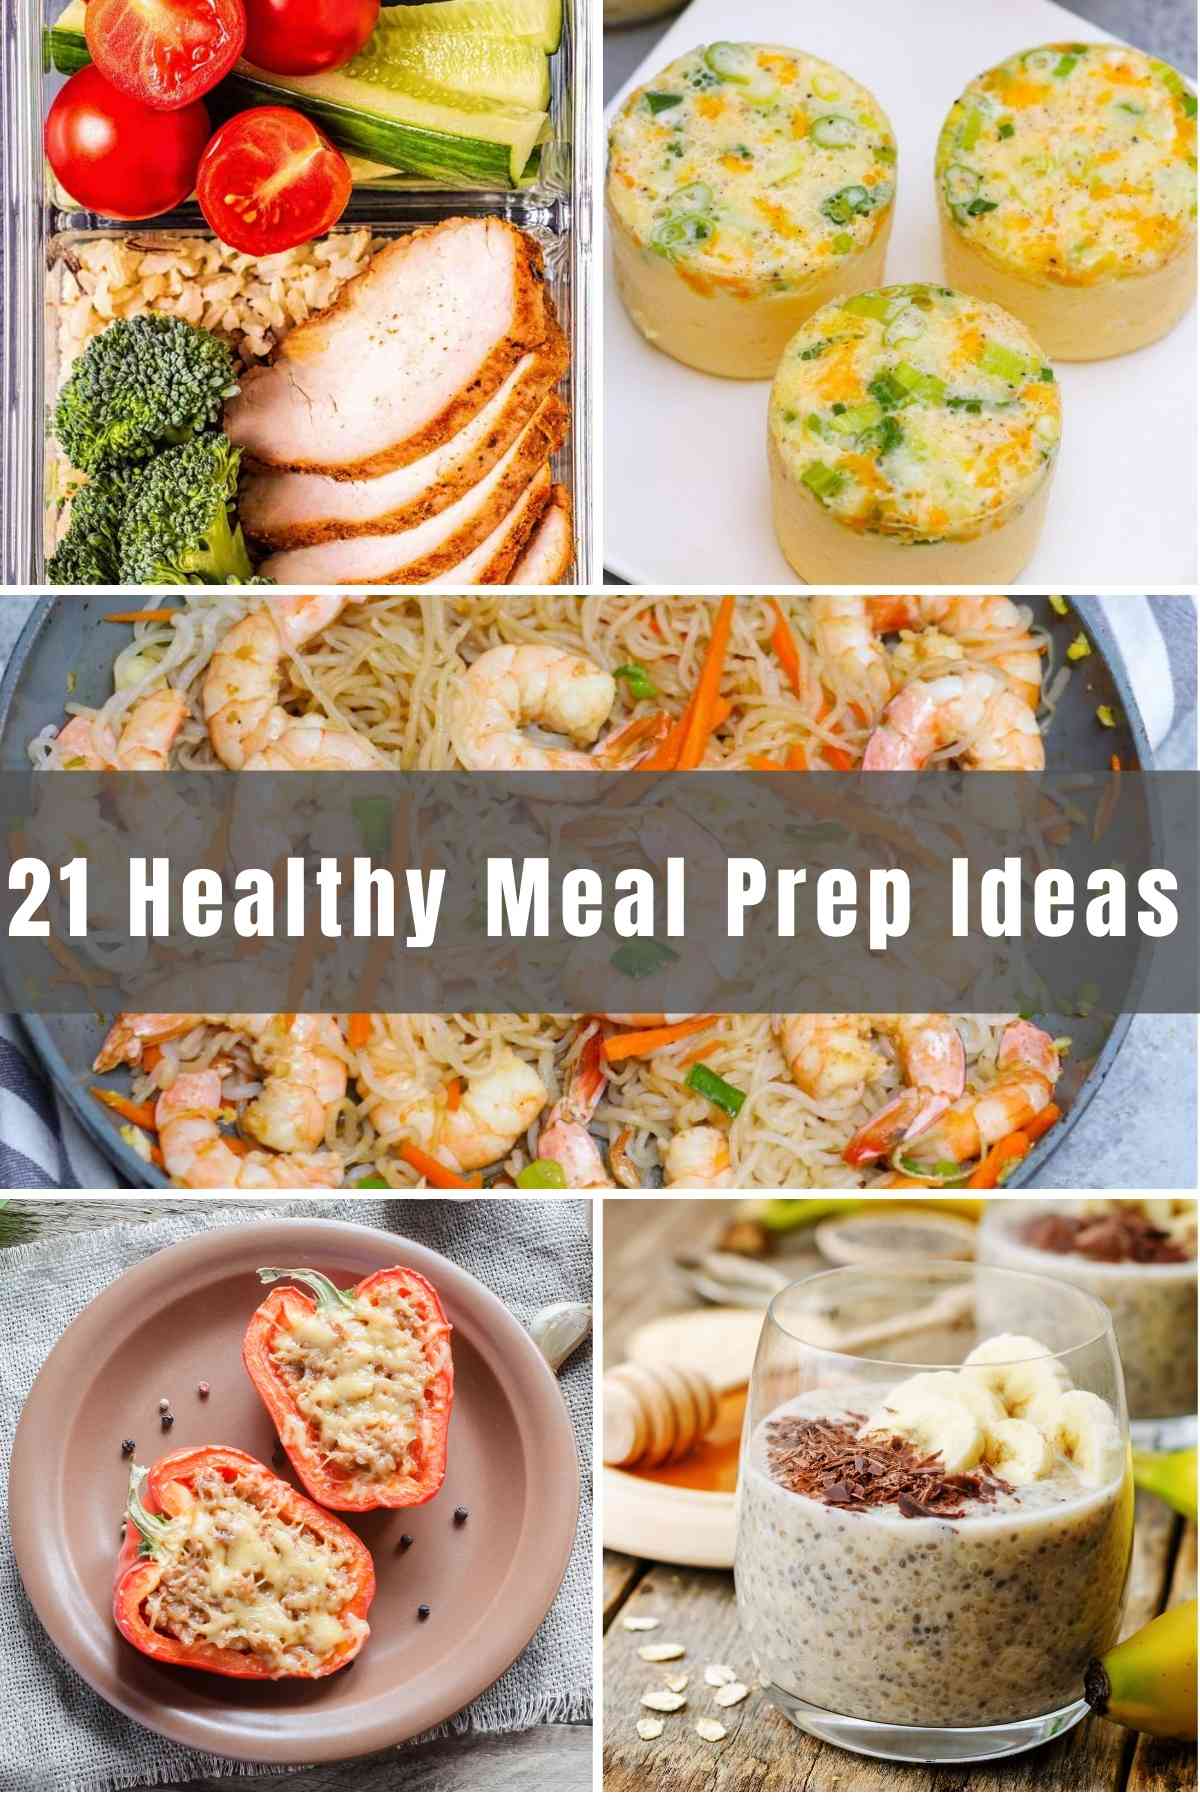 Meal prepping has long been a go-to choice in the workout world. Gym goers praise it for keeping their diet on track and the weight off. The end results? Pounds shed, time saved and less money spent. We’ve rounded up 21 healthy meal prep ideas for weight loss, and once you get started, you won’t be able to stop!